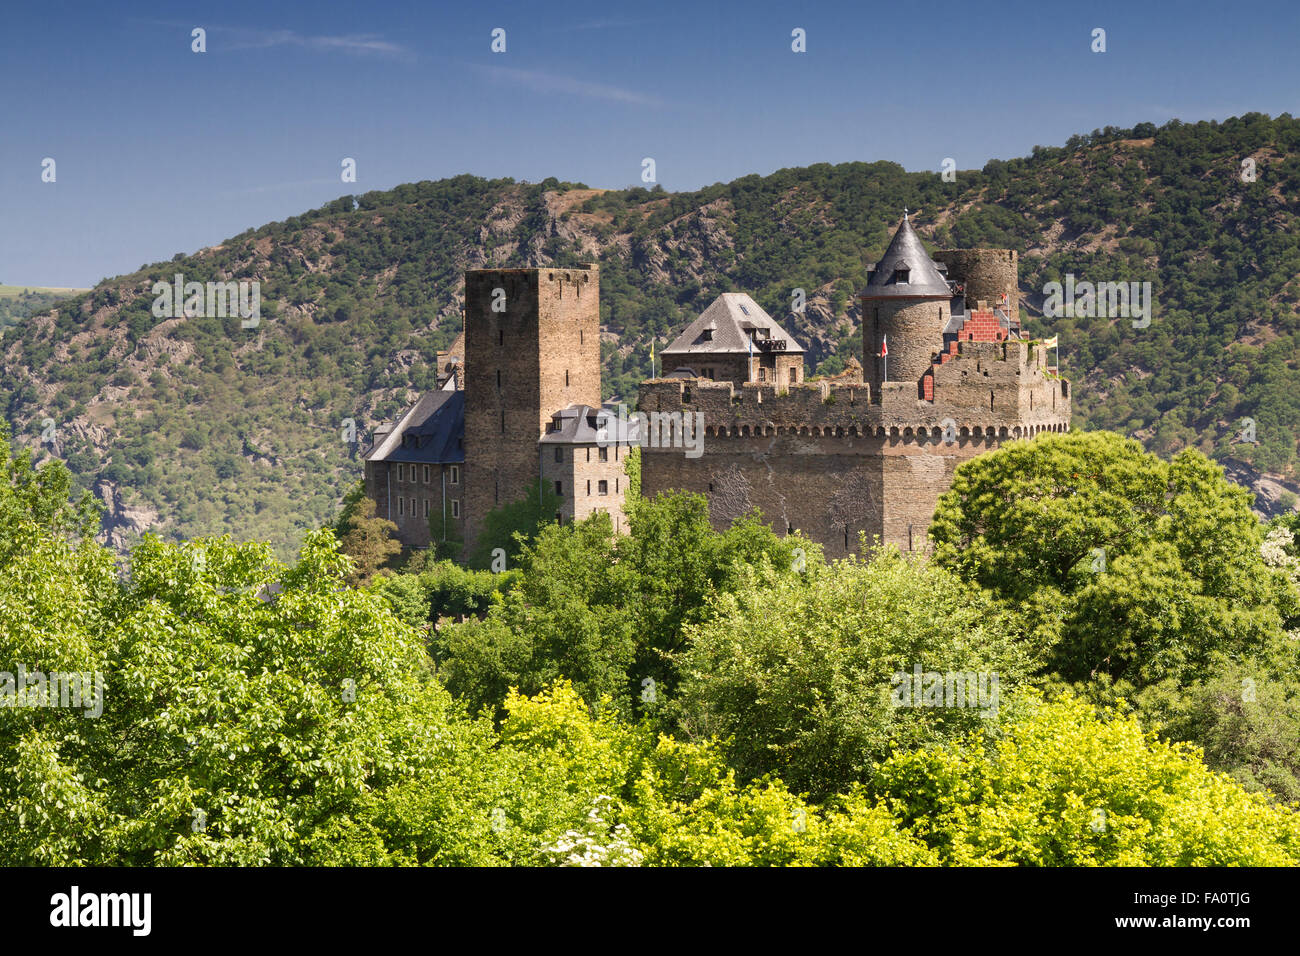 Castle Schoenburg at the  Upper Middle Rhine Valley, Germany Stock Photo